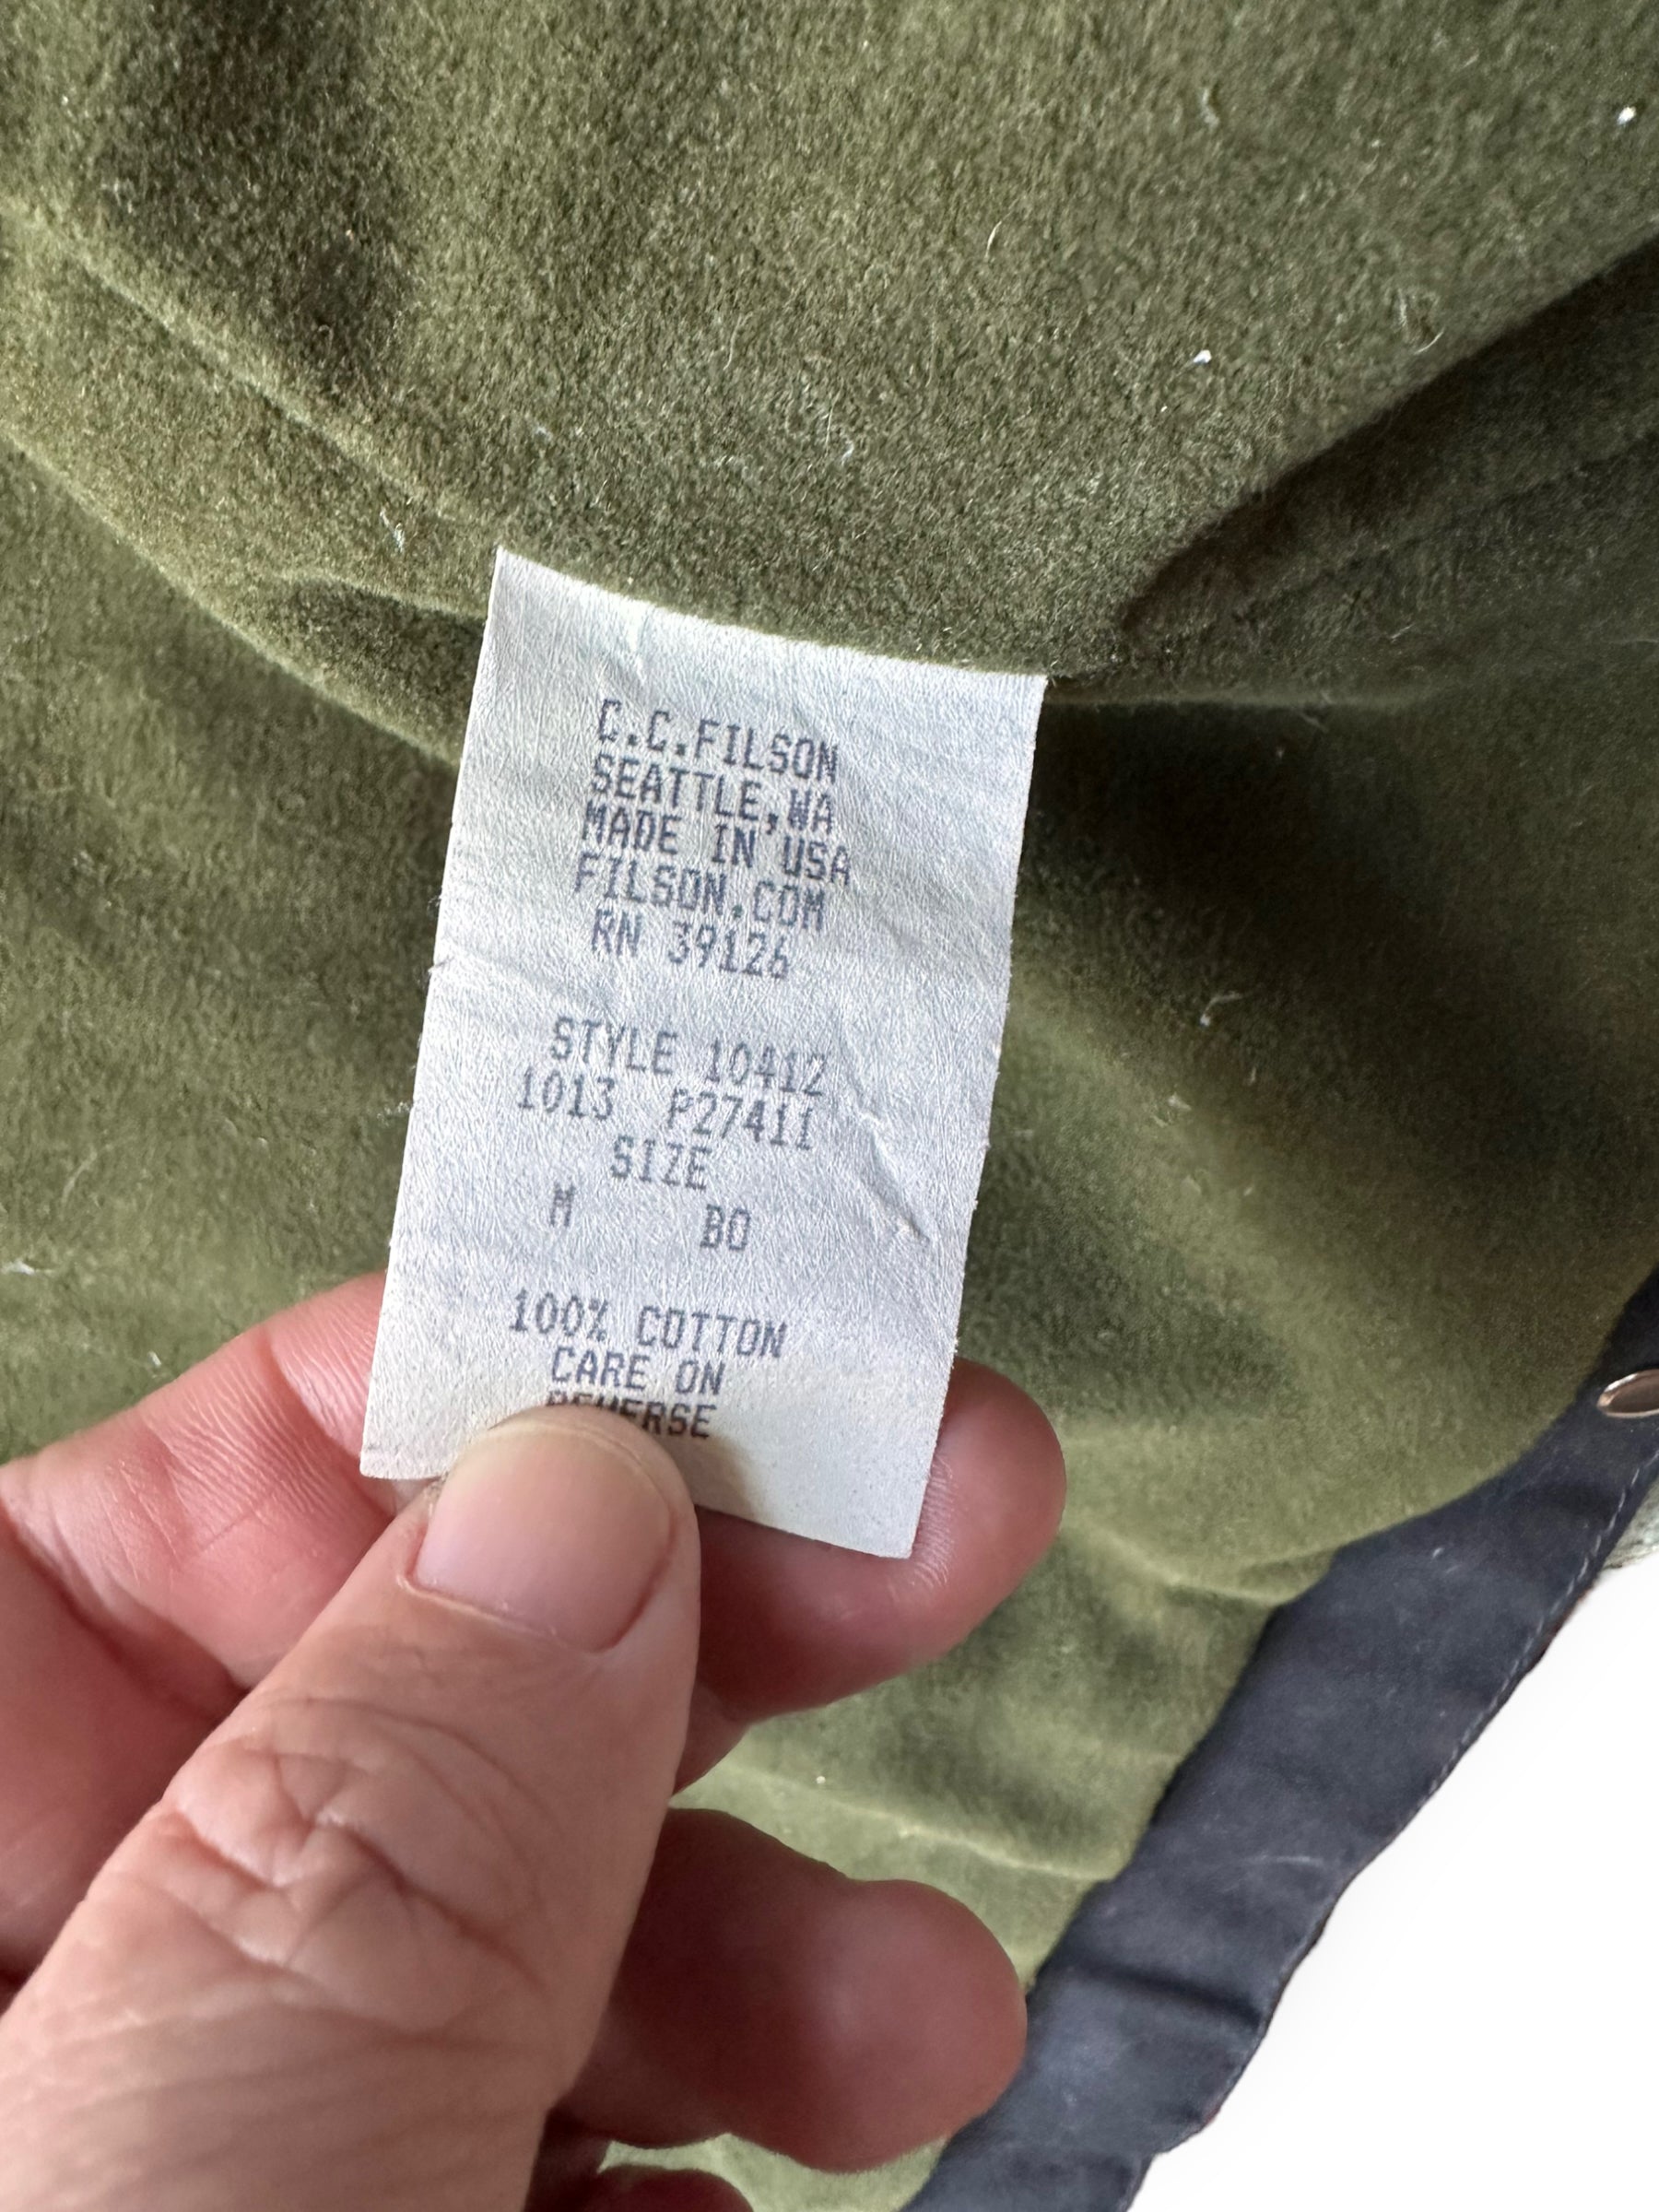 Production Tag View of Filson Black Short Lined Tin Cloth Cruiser SZ M |  Barn Owl Vintage Goods | Vintage Filson Workwear Seattle